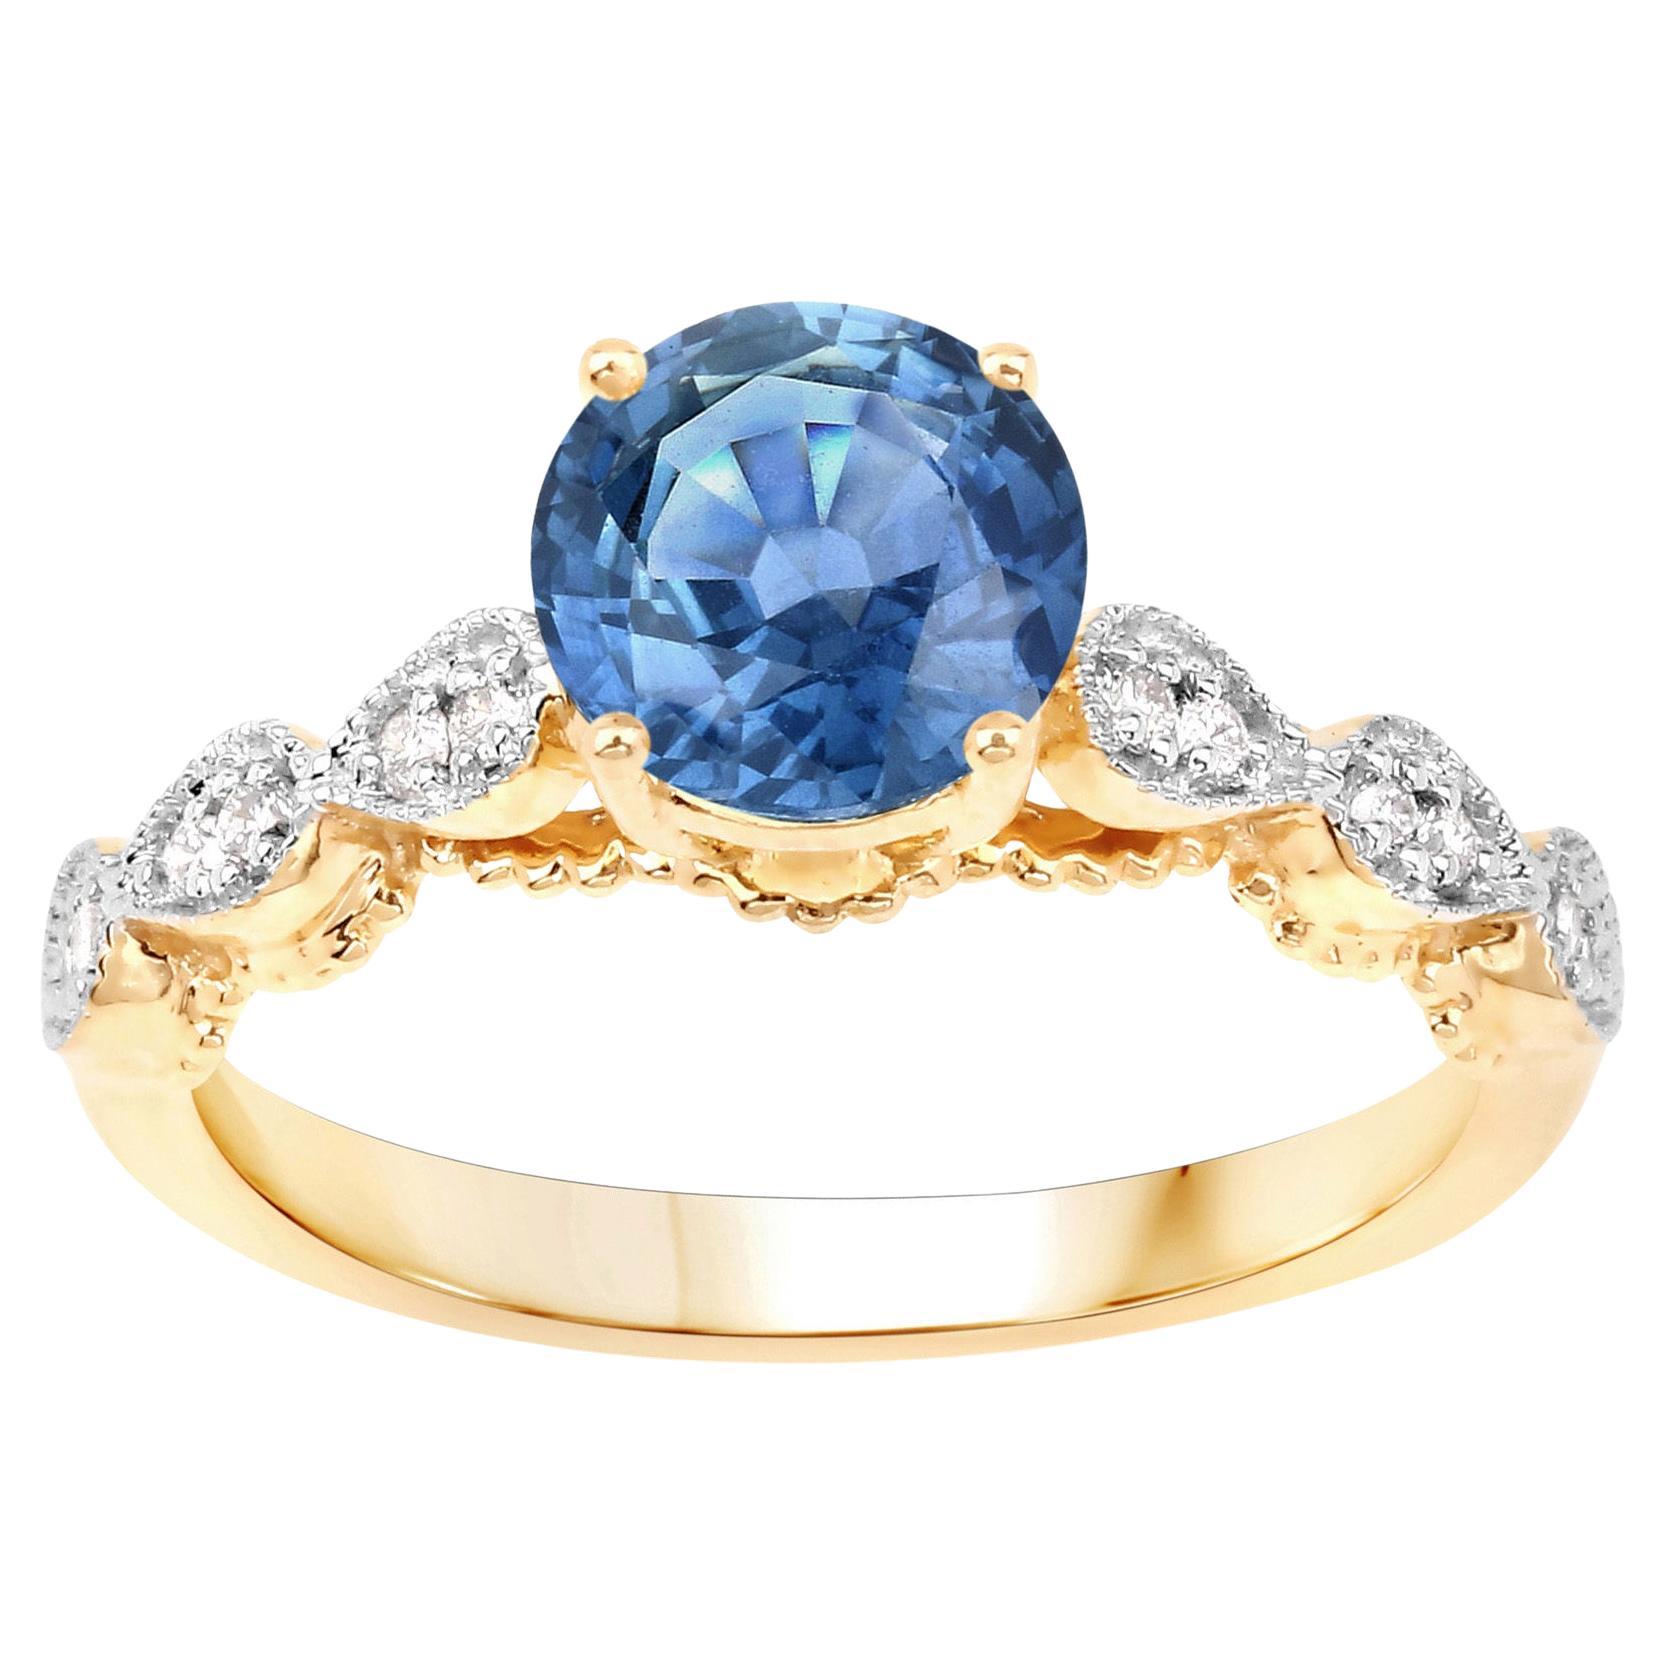 Blue Sapphire Ring With Diamonds 1.27 Carats 14K Yellow Gold